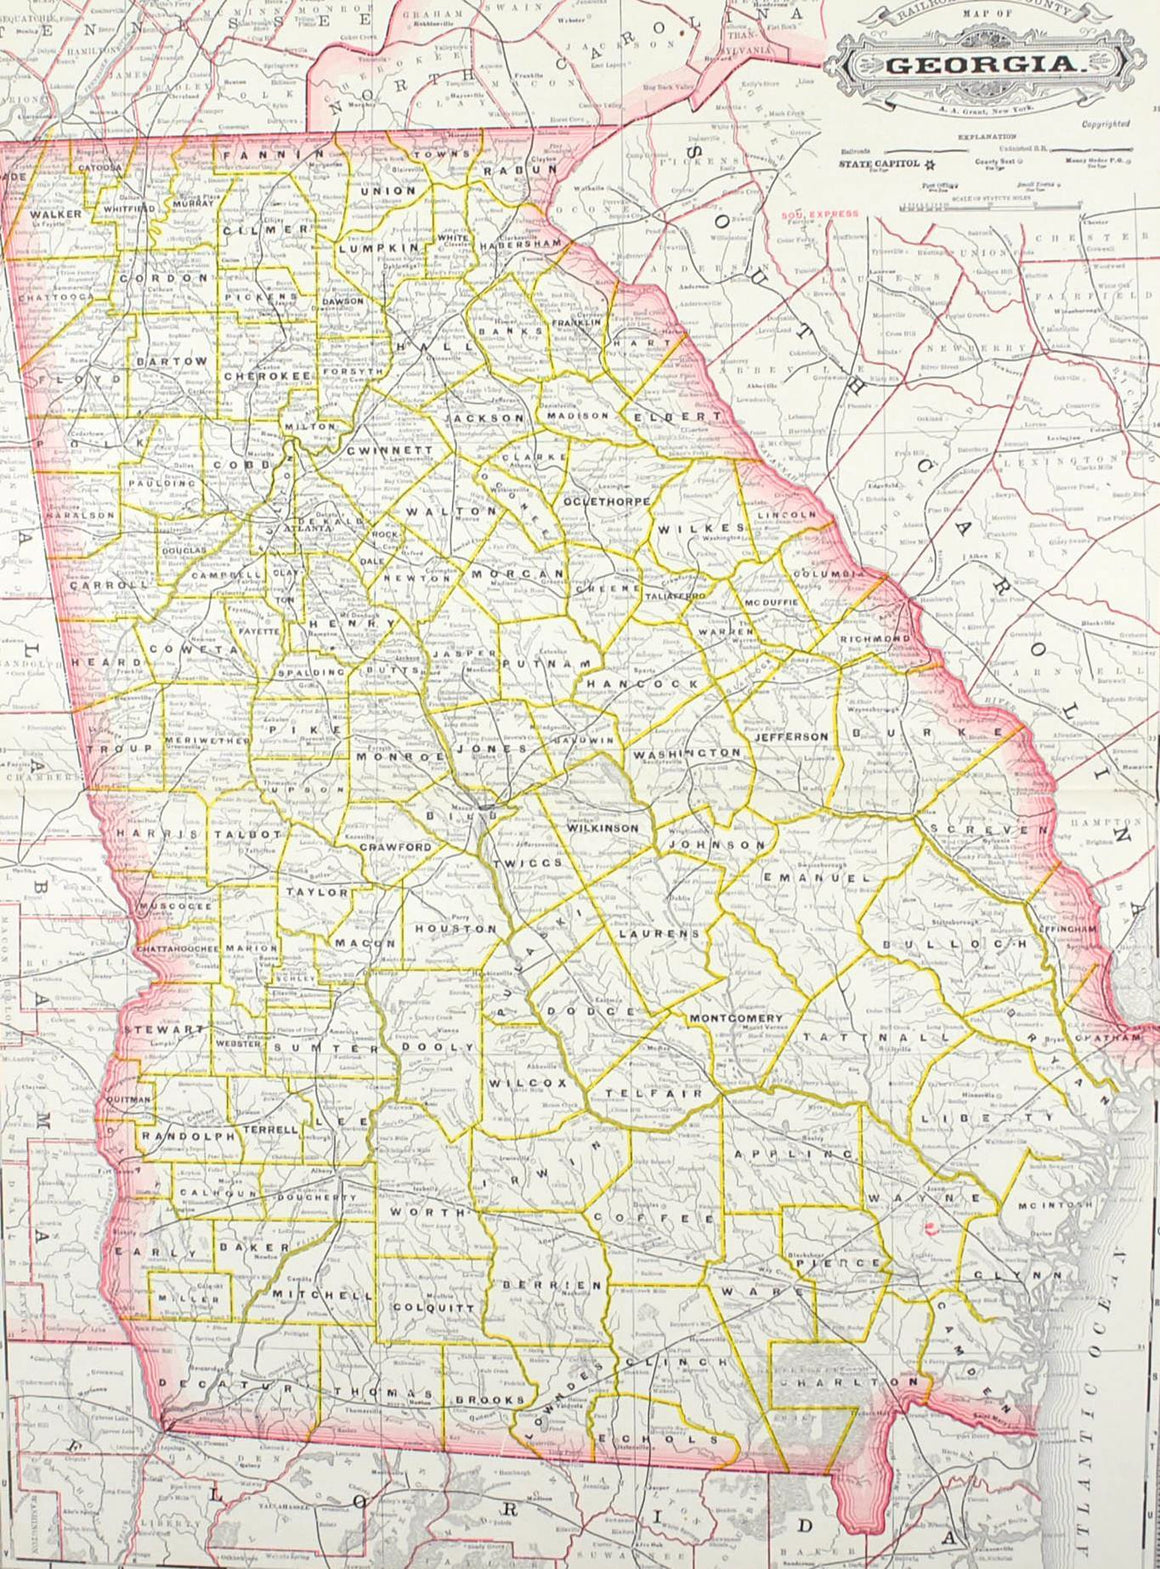 1887 Railroad and County Map of Georgia